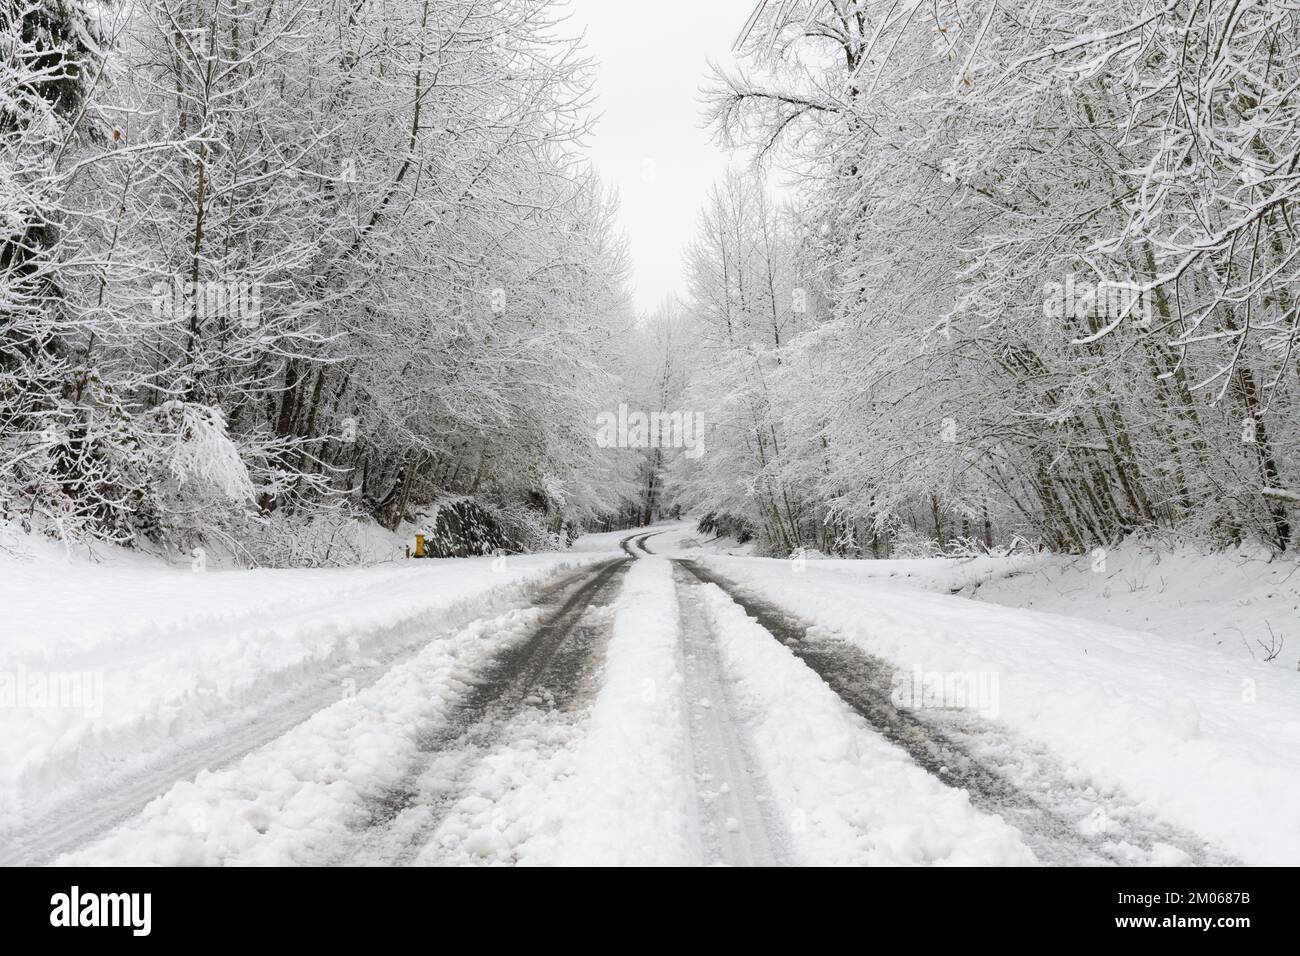 Snow covered road with slush in the tyre tracks and trees hanging down over the snowy wintry county roadway Stock Photo